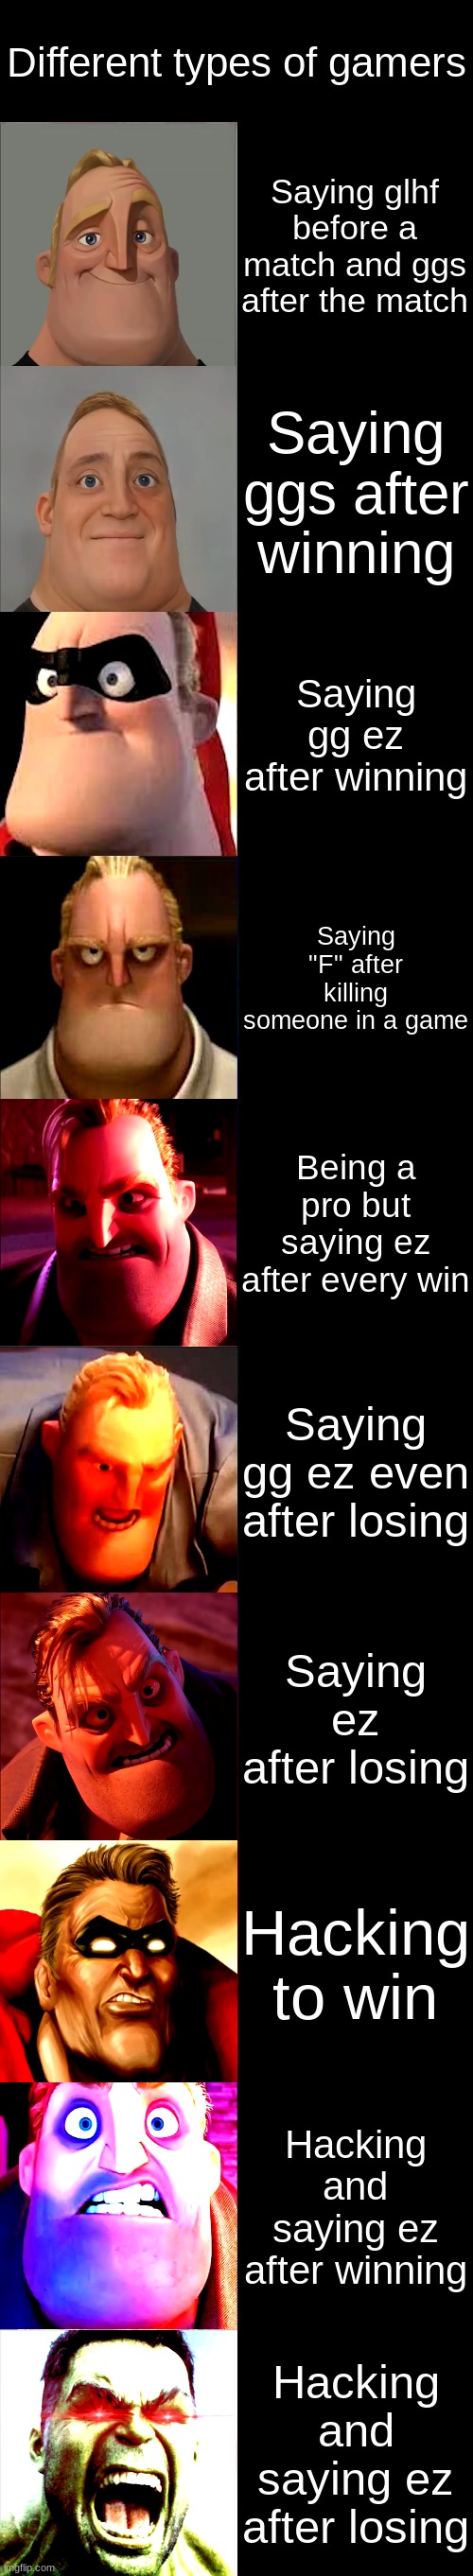 Mr. Incredible Becoming Angry | Different types of gamers; Saying glhf before a match and ggs after the match; Saying ggs after winning; Saying gg ez after winning; Saying "F" after killing someone in a game; Being a pro but saying ez after every win; Saying gg ez even after losing; Saying ez after losing; Hacking to win; Hacking and saying ez after winning; Hacking and saying ez after losing | image tagged in mr incredible becoming angry | made w/ Imgflip meme maker